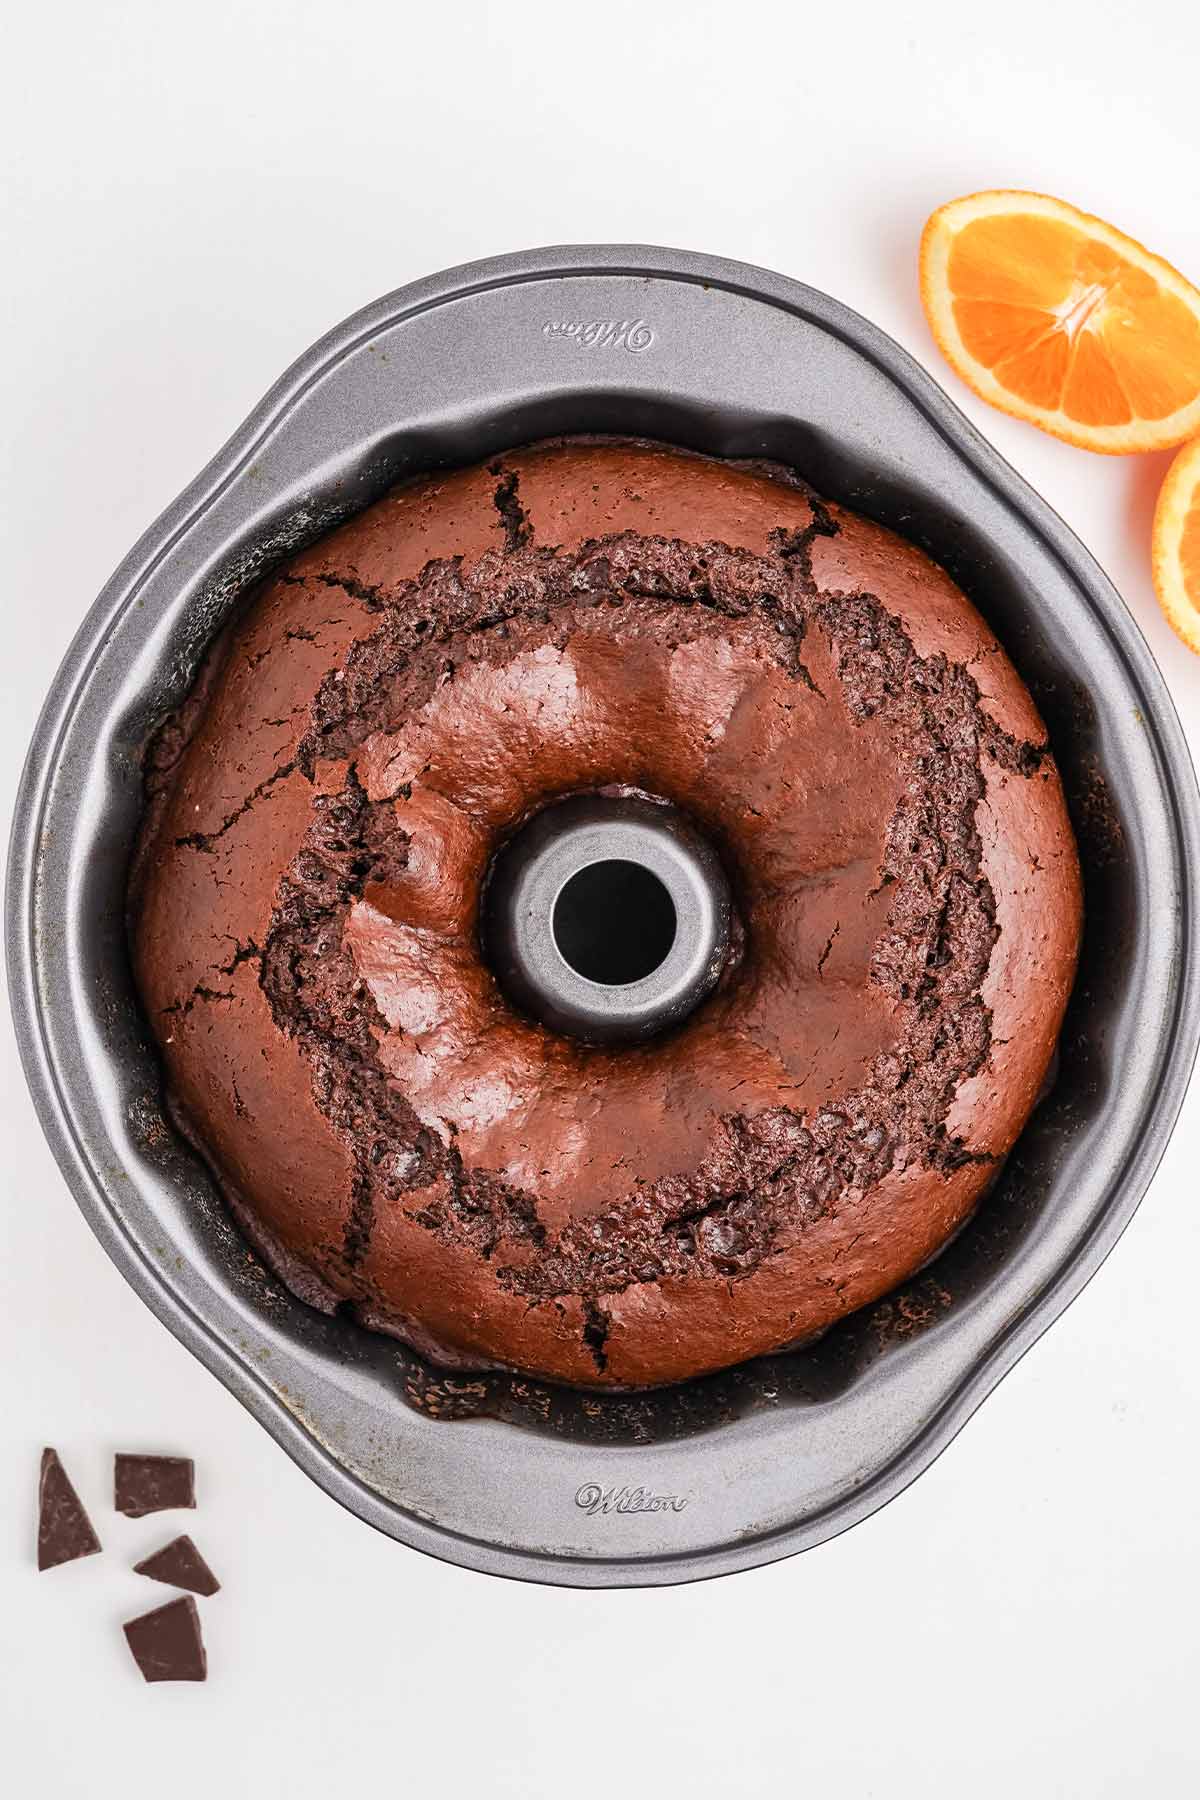 Chocolate orange bundt cake fresh from the oven in the pan.